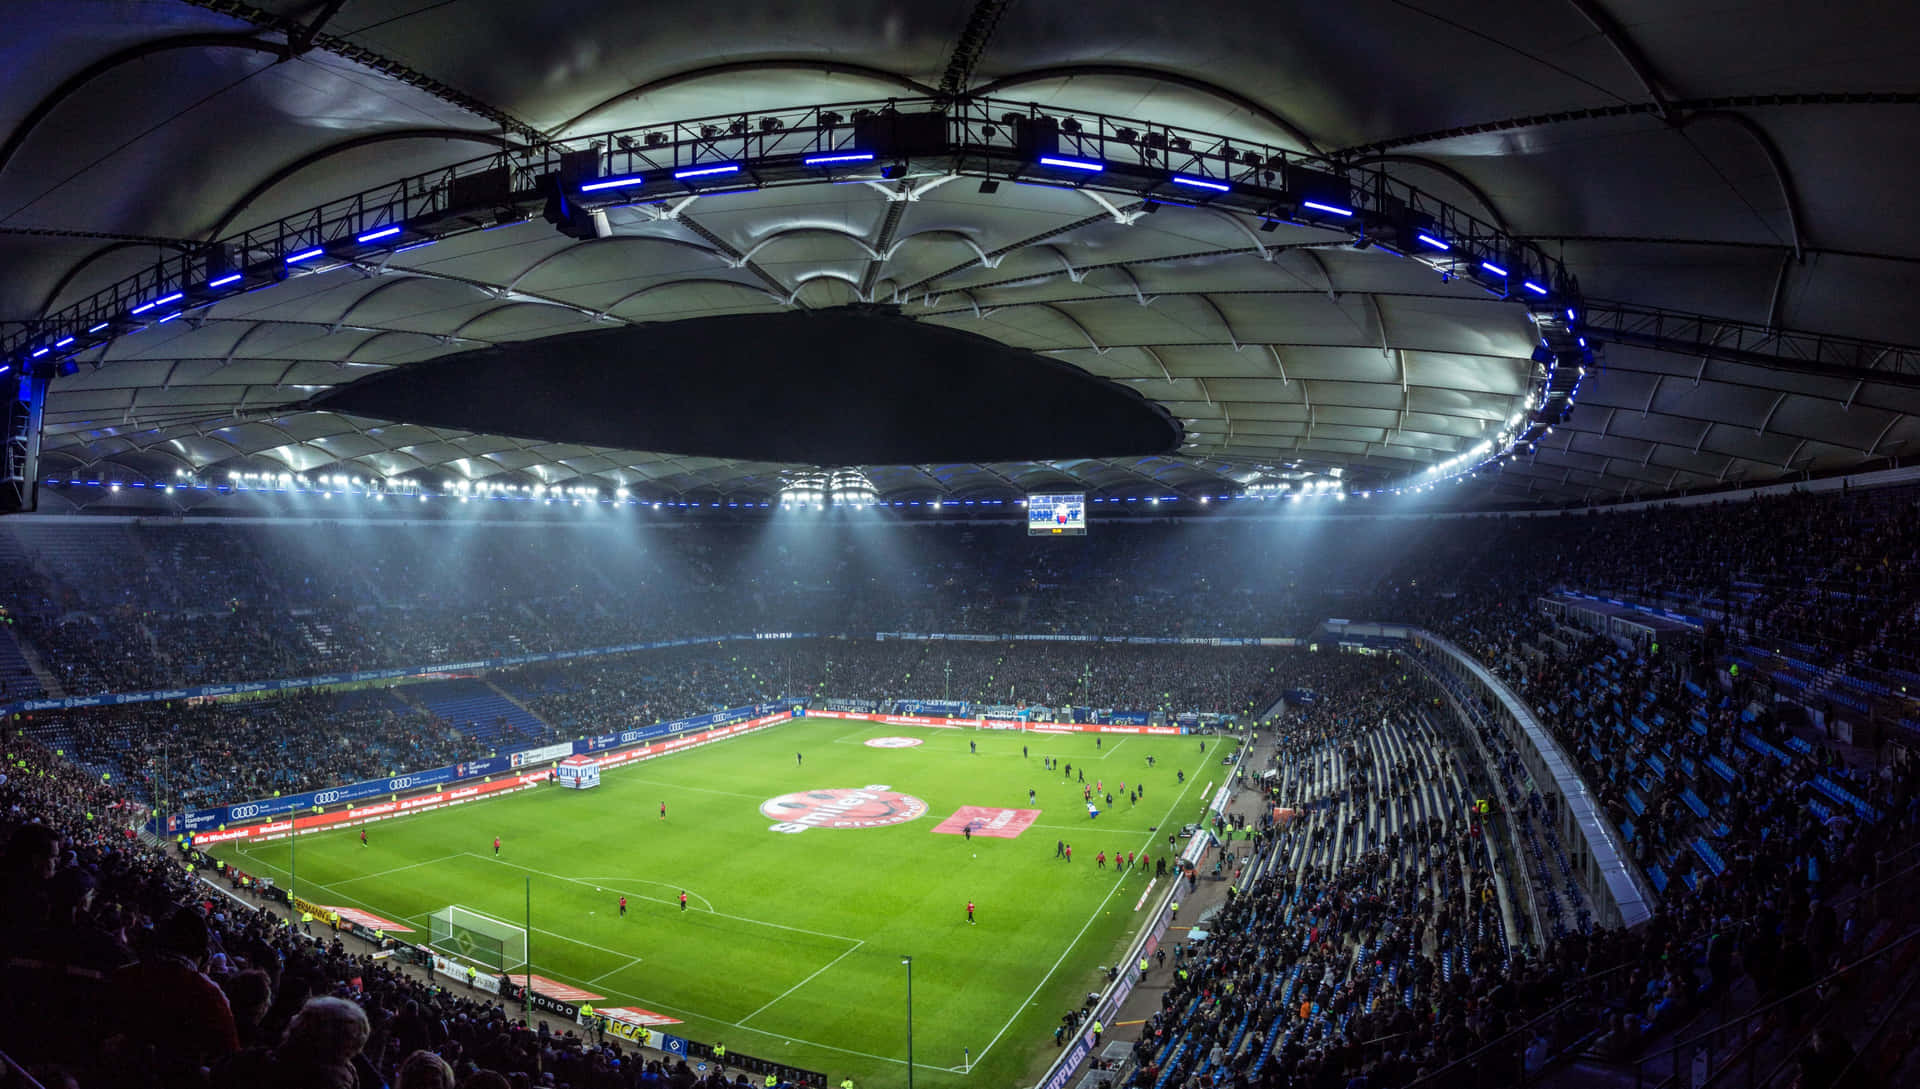 Spectacular view of a soccer stadium with bright lights at night